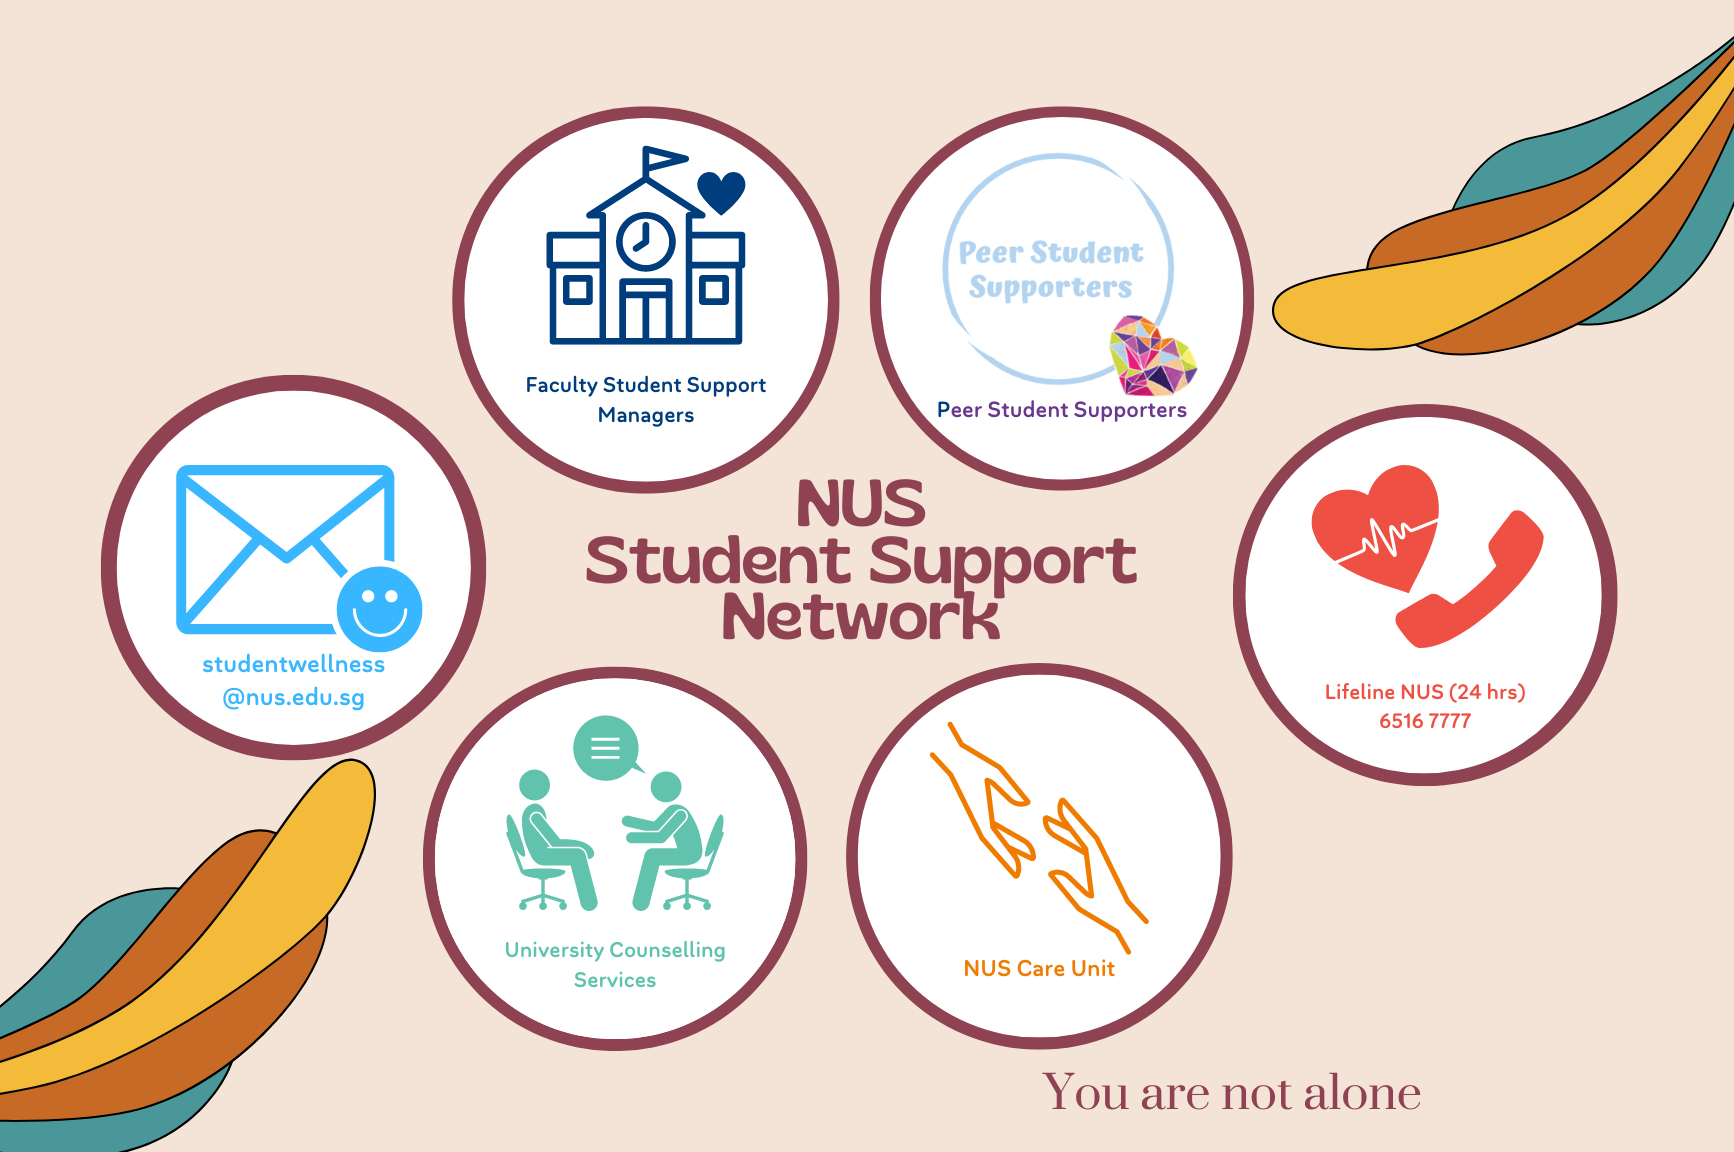 NUS Student Support Network (1156 x 768 px) (1)